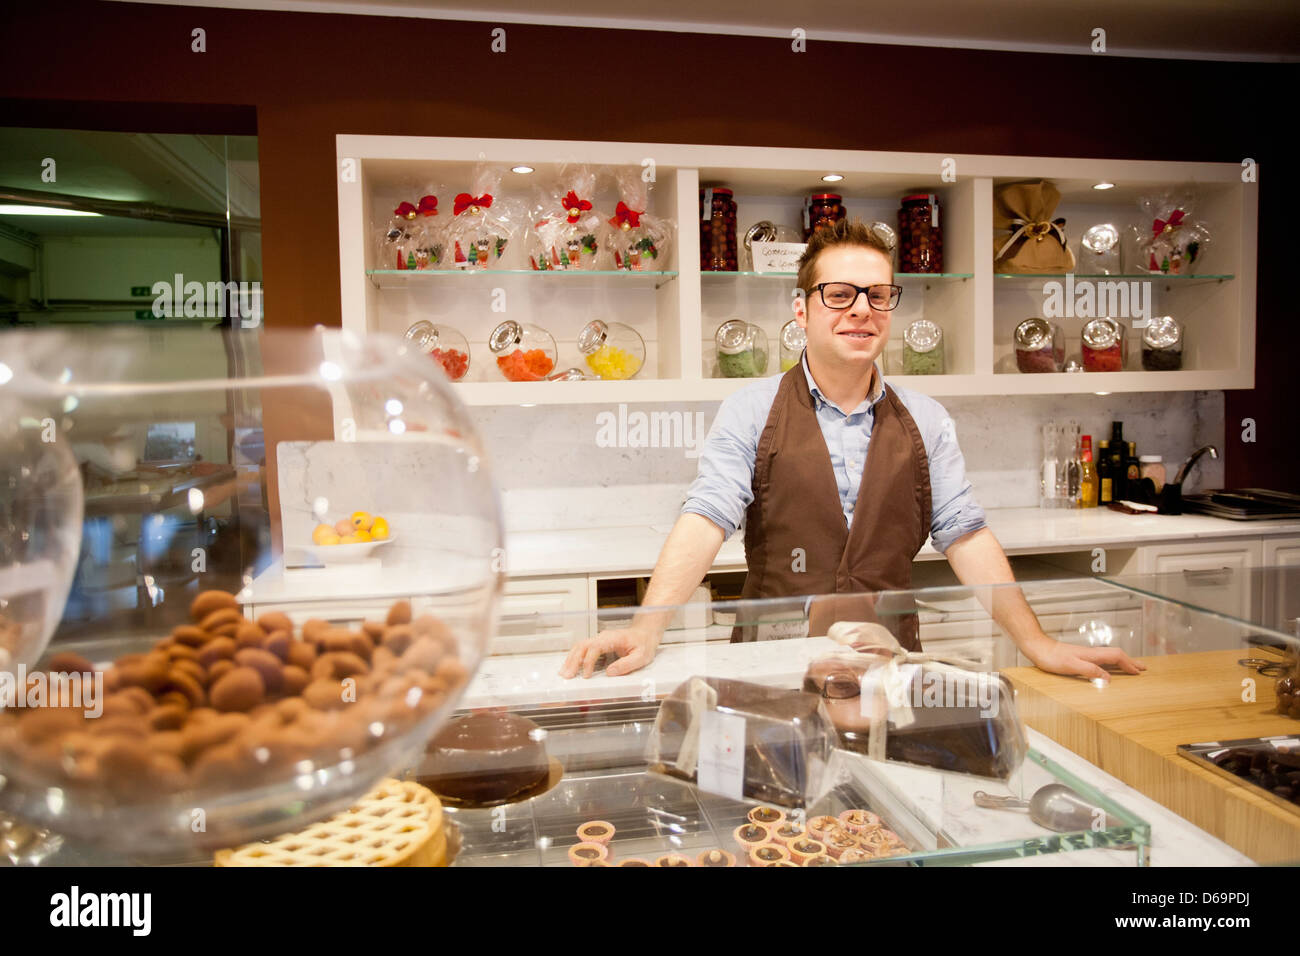 Cashier smiling behind bakery counter Stock Photo